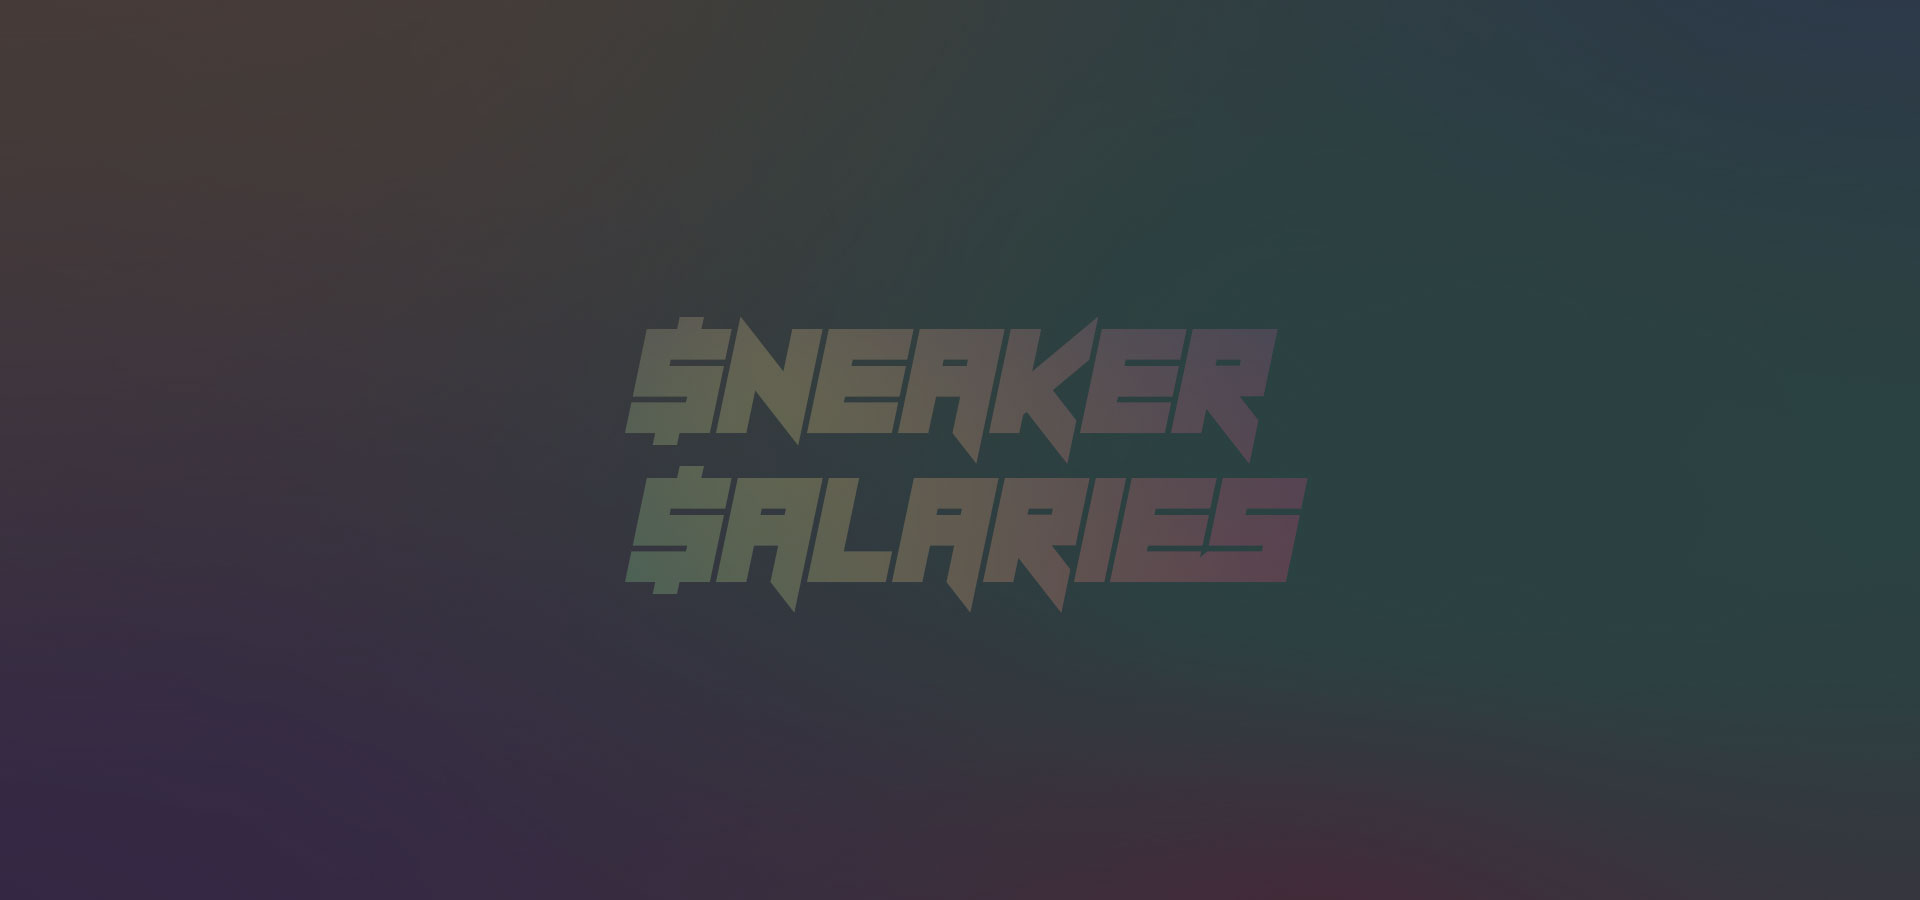 Listen To Our New Podcast, "Sneaker Salaries"